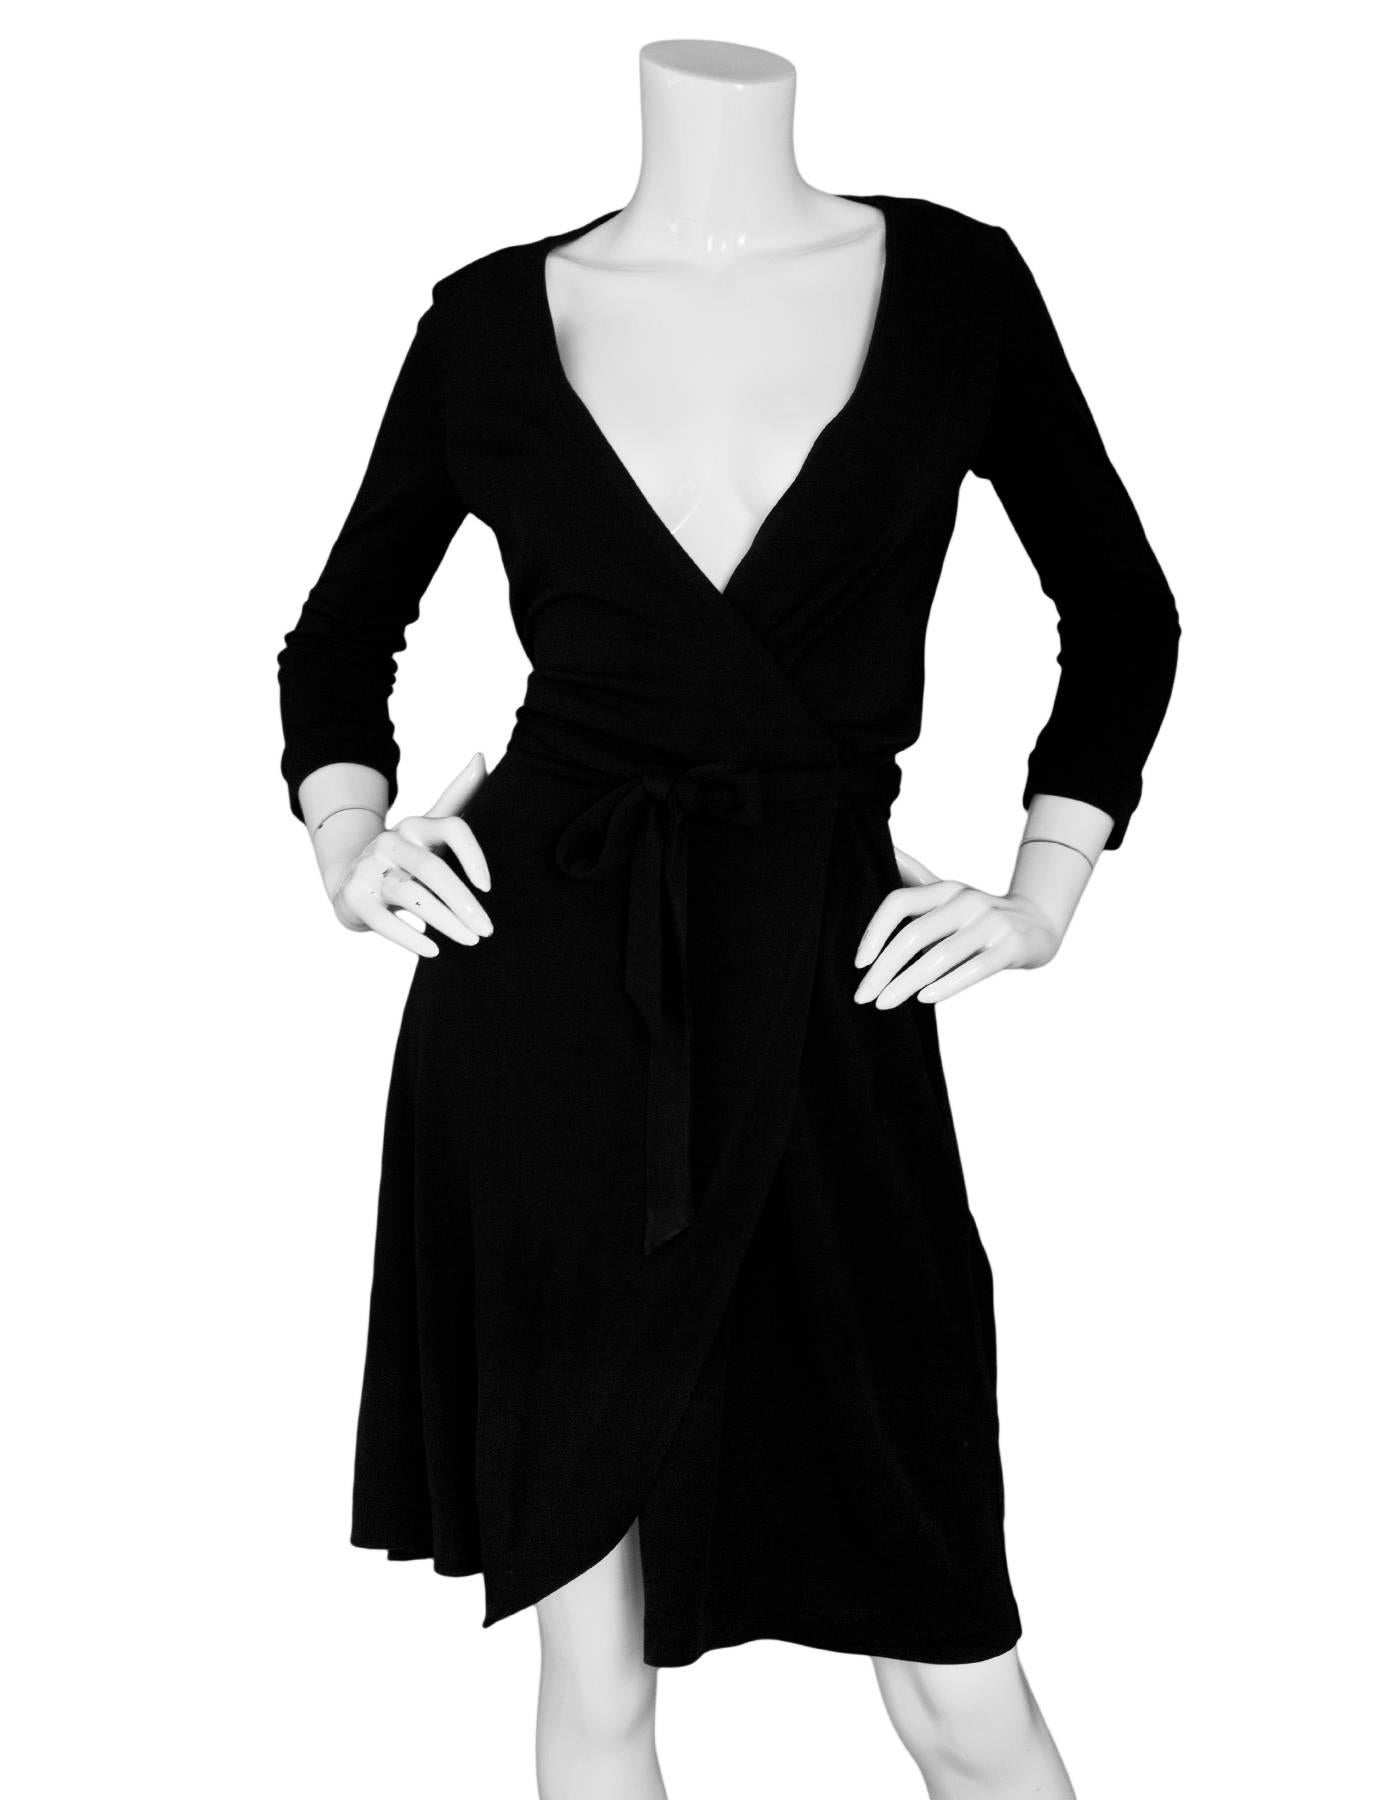 Diane von Furstenberg Black Wrap Dress Sz 4

Made In: USA
Color: Black
Composition: 85% viscose, 15% polyamide
Lining: None
Closure/Opening: Wrap tie closure
Exterior Pockets: None
Overall Condition: Excellent pre-owned condition, some stains at